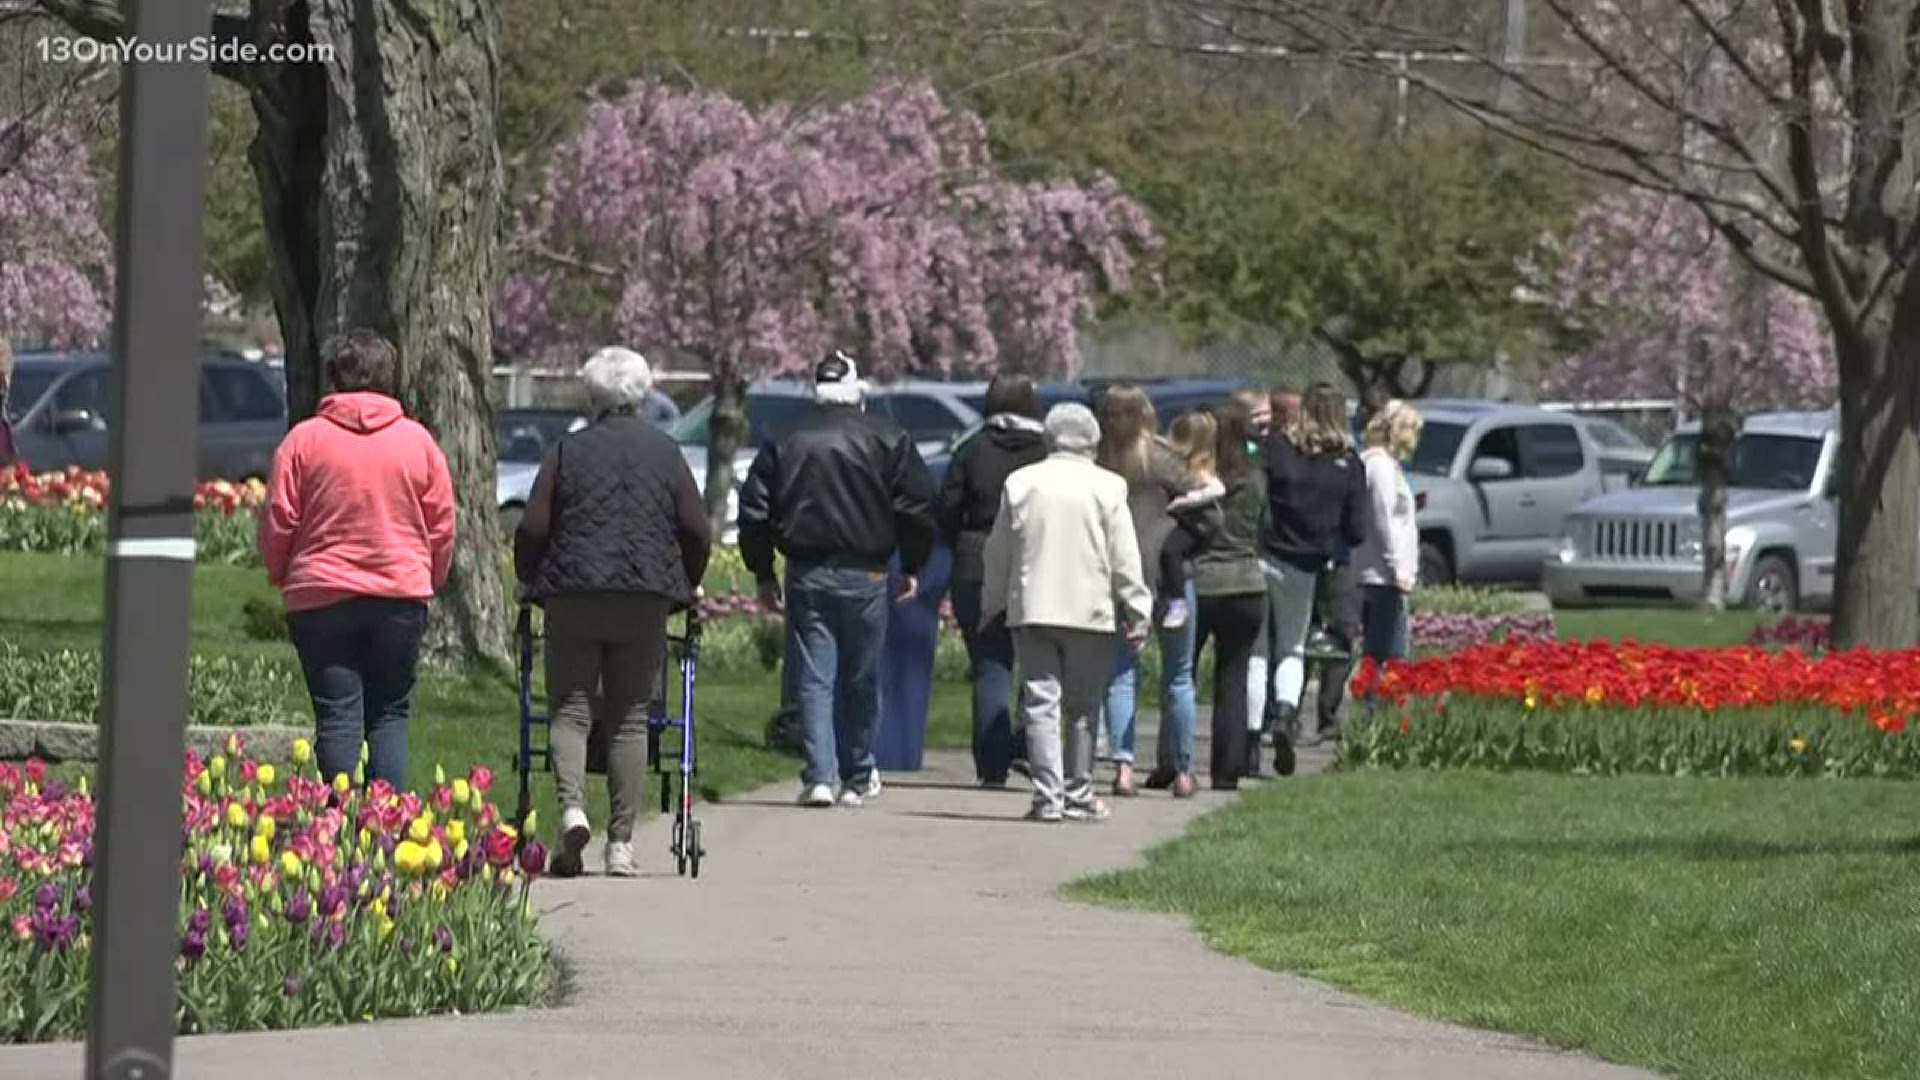 COVID-19 canceled Holland's Tulip Time for the first time in 91 years. Organizers hope fundraising efforts will help recoup the festival's 2020 financial losses.